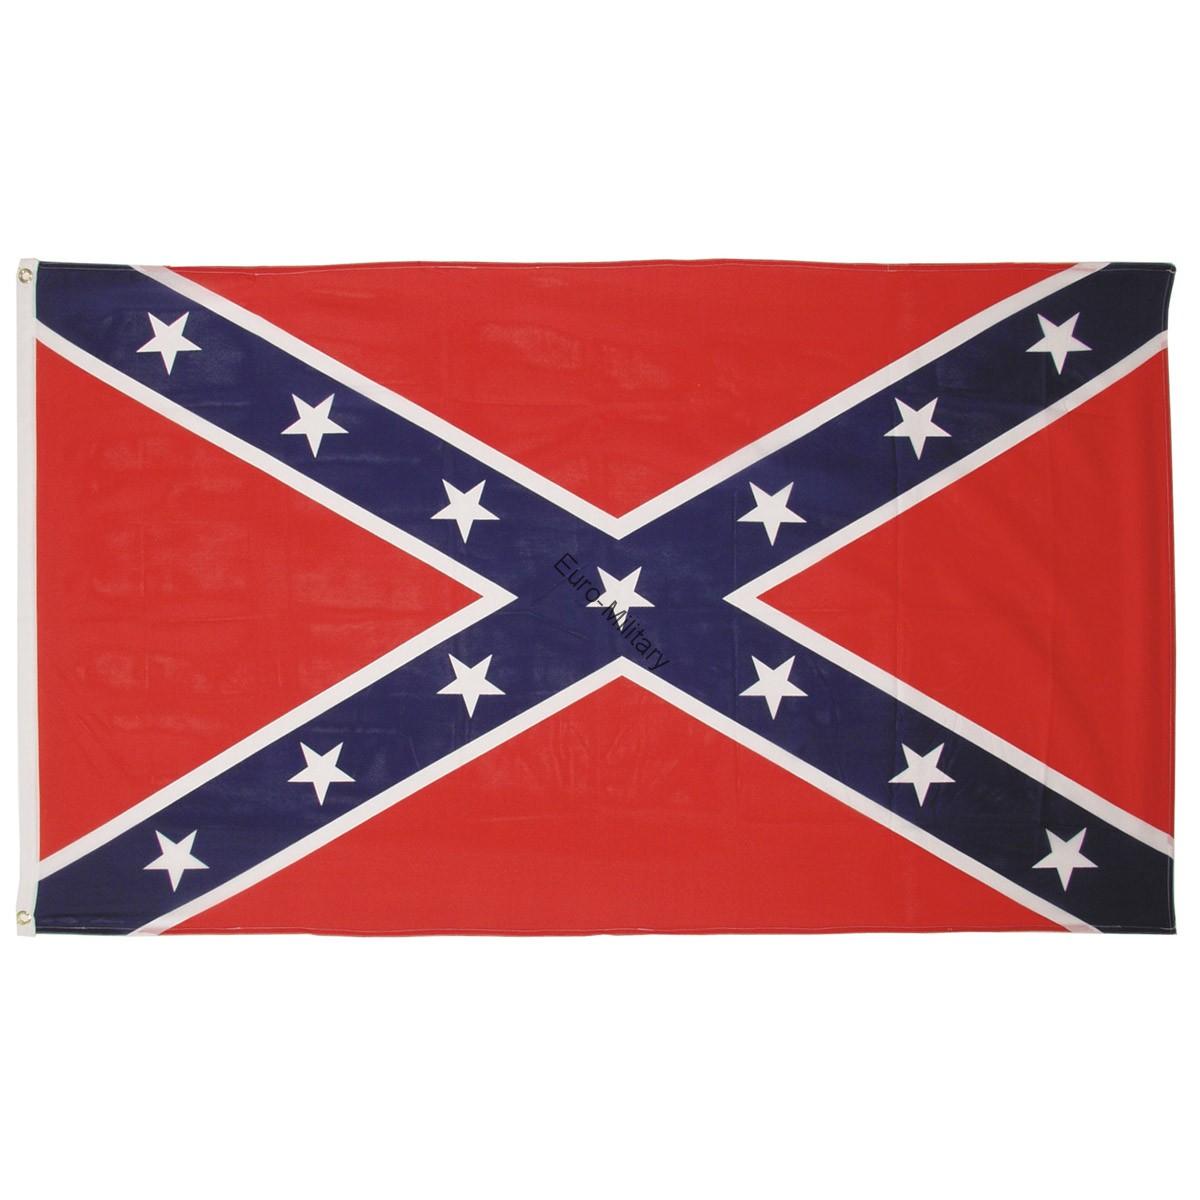 Confederate / South Cross Flag - 90x150cm w/ Reinforcement Band and Metal Hooks